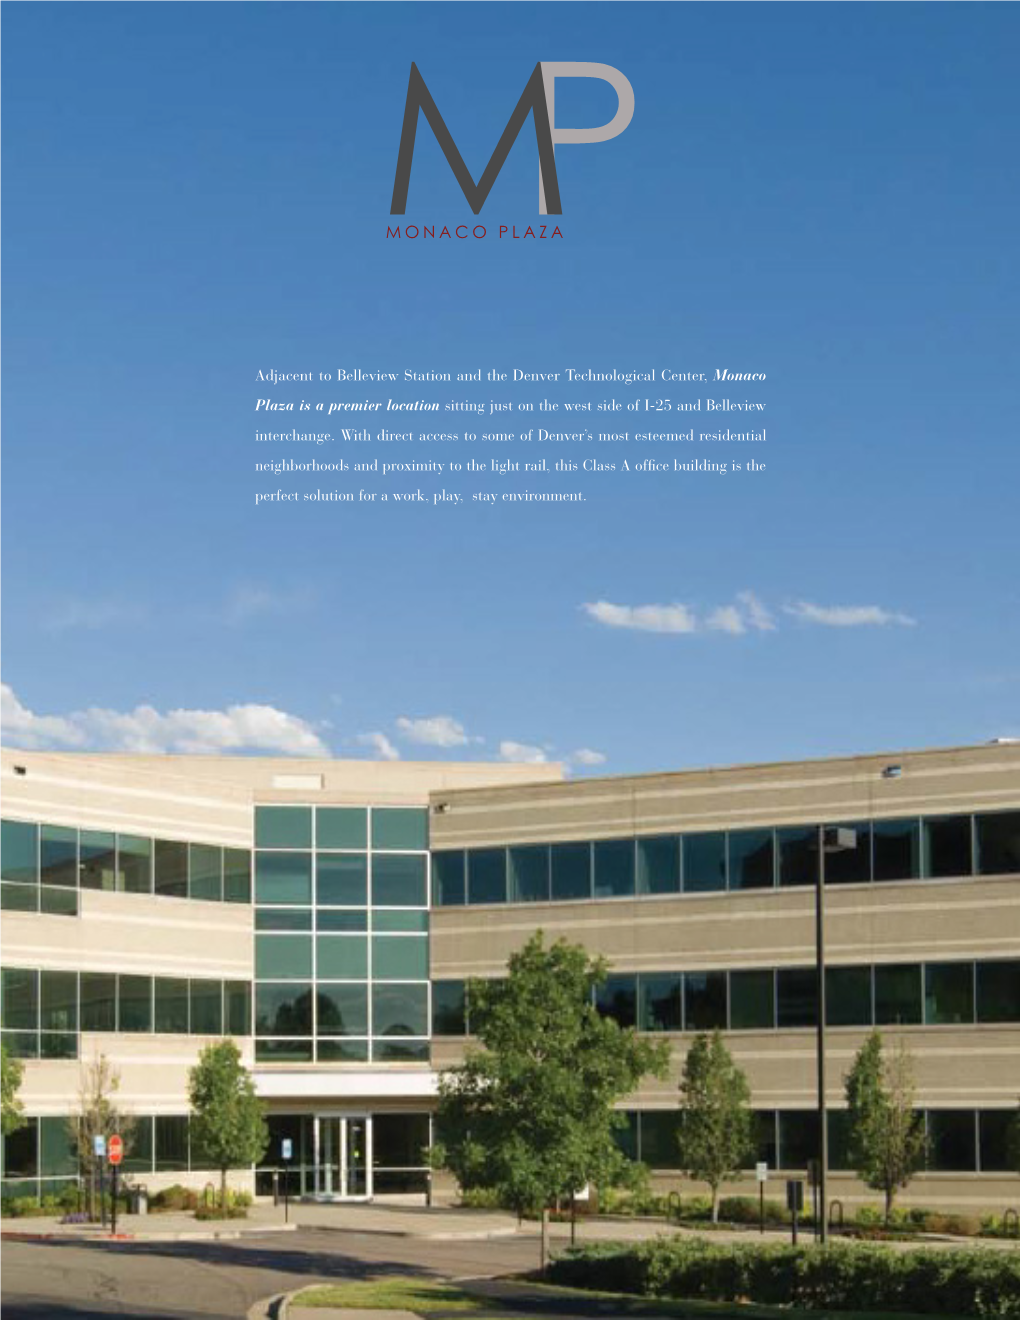 Adjacent to Belleview Station and the Denver Technological Center, Monaco Plaza Is a Premier Location Sitting Just on the West Side of I-25 and Belleview Interchange